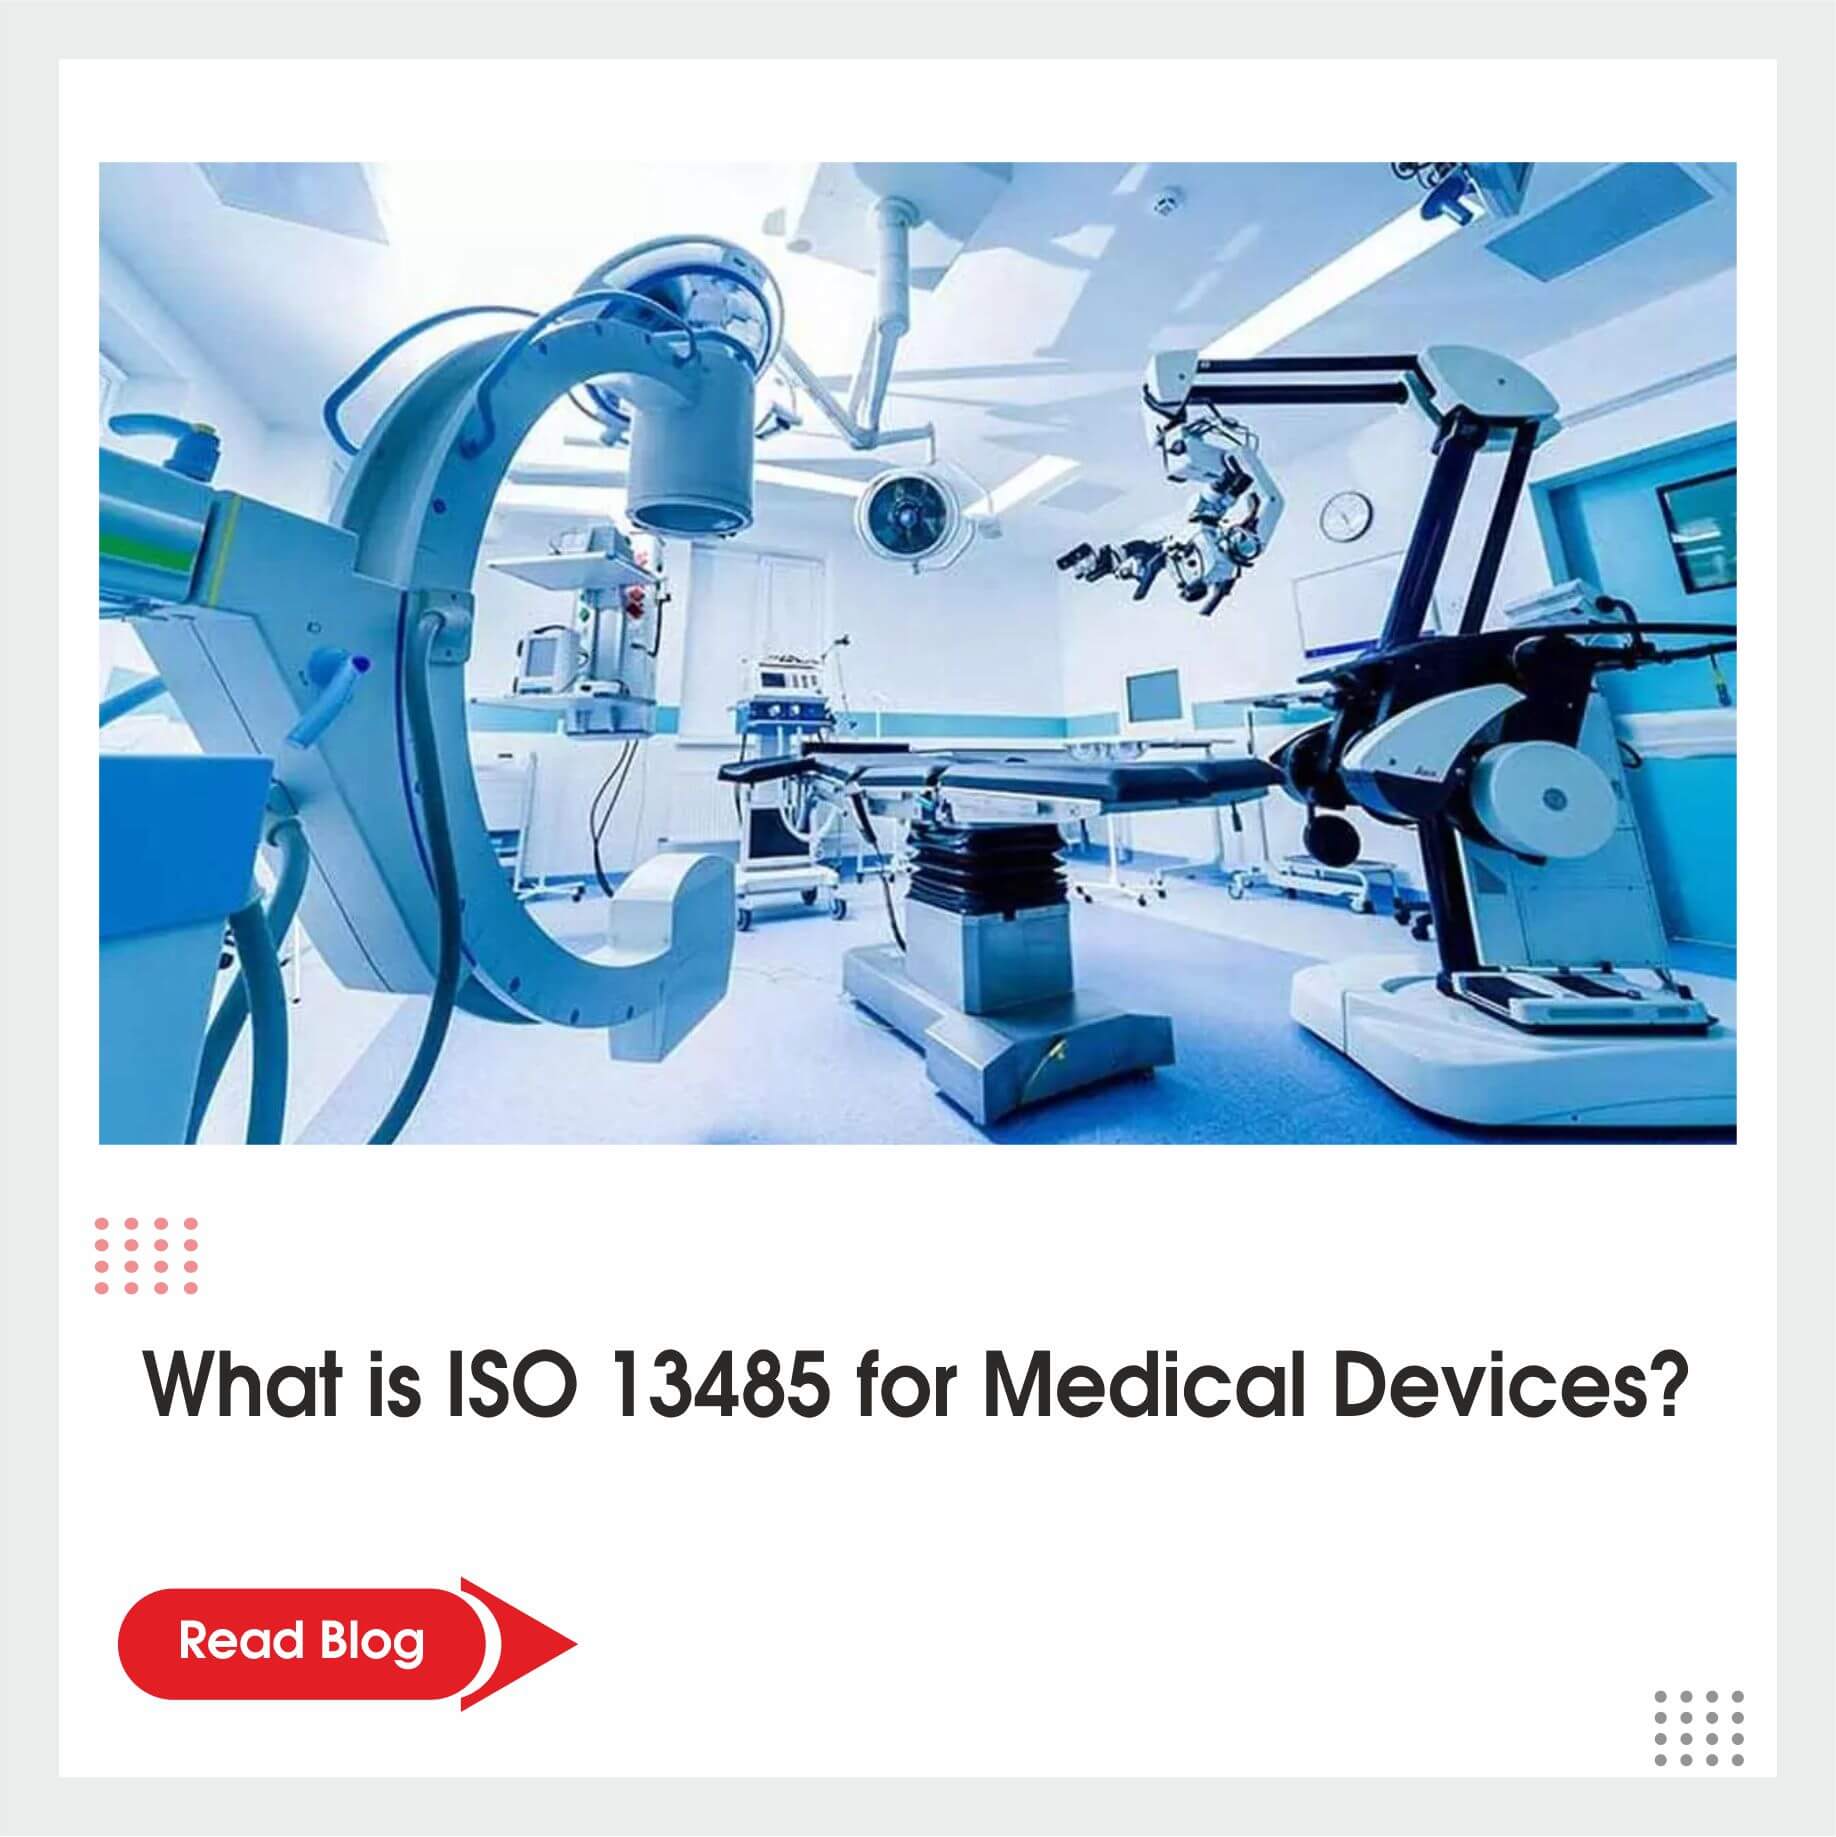 What is ISO 13485 for Medical Devices?